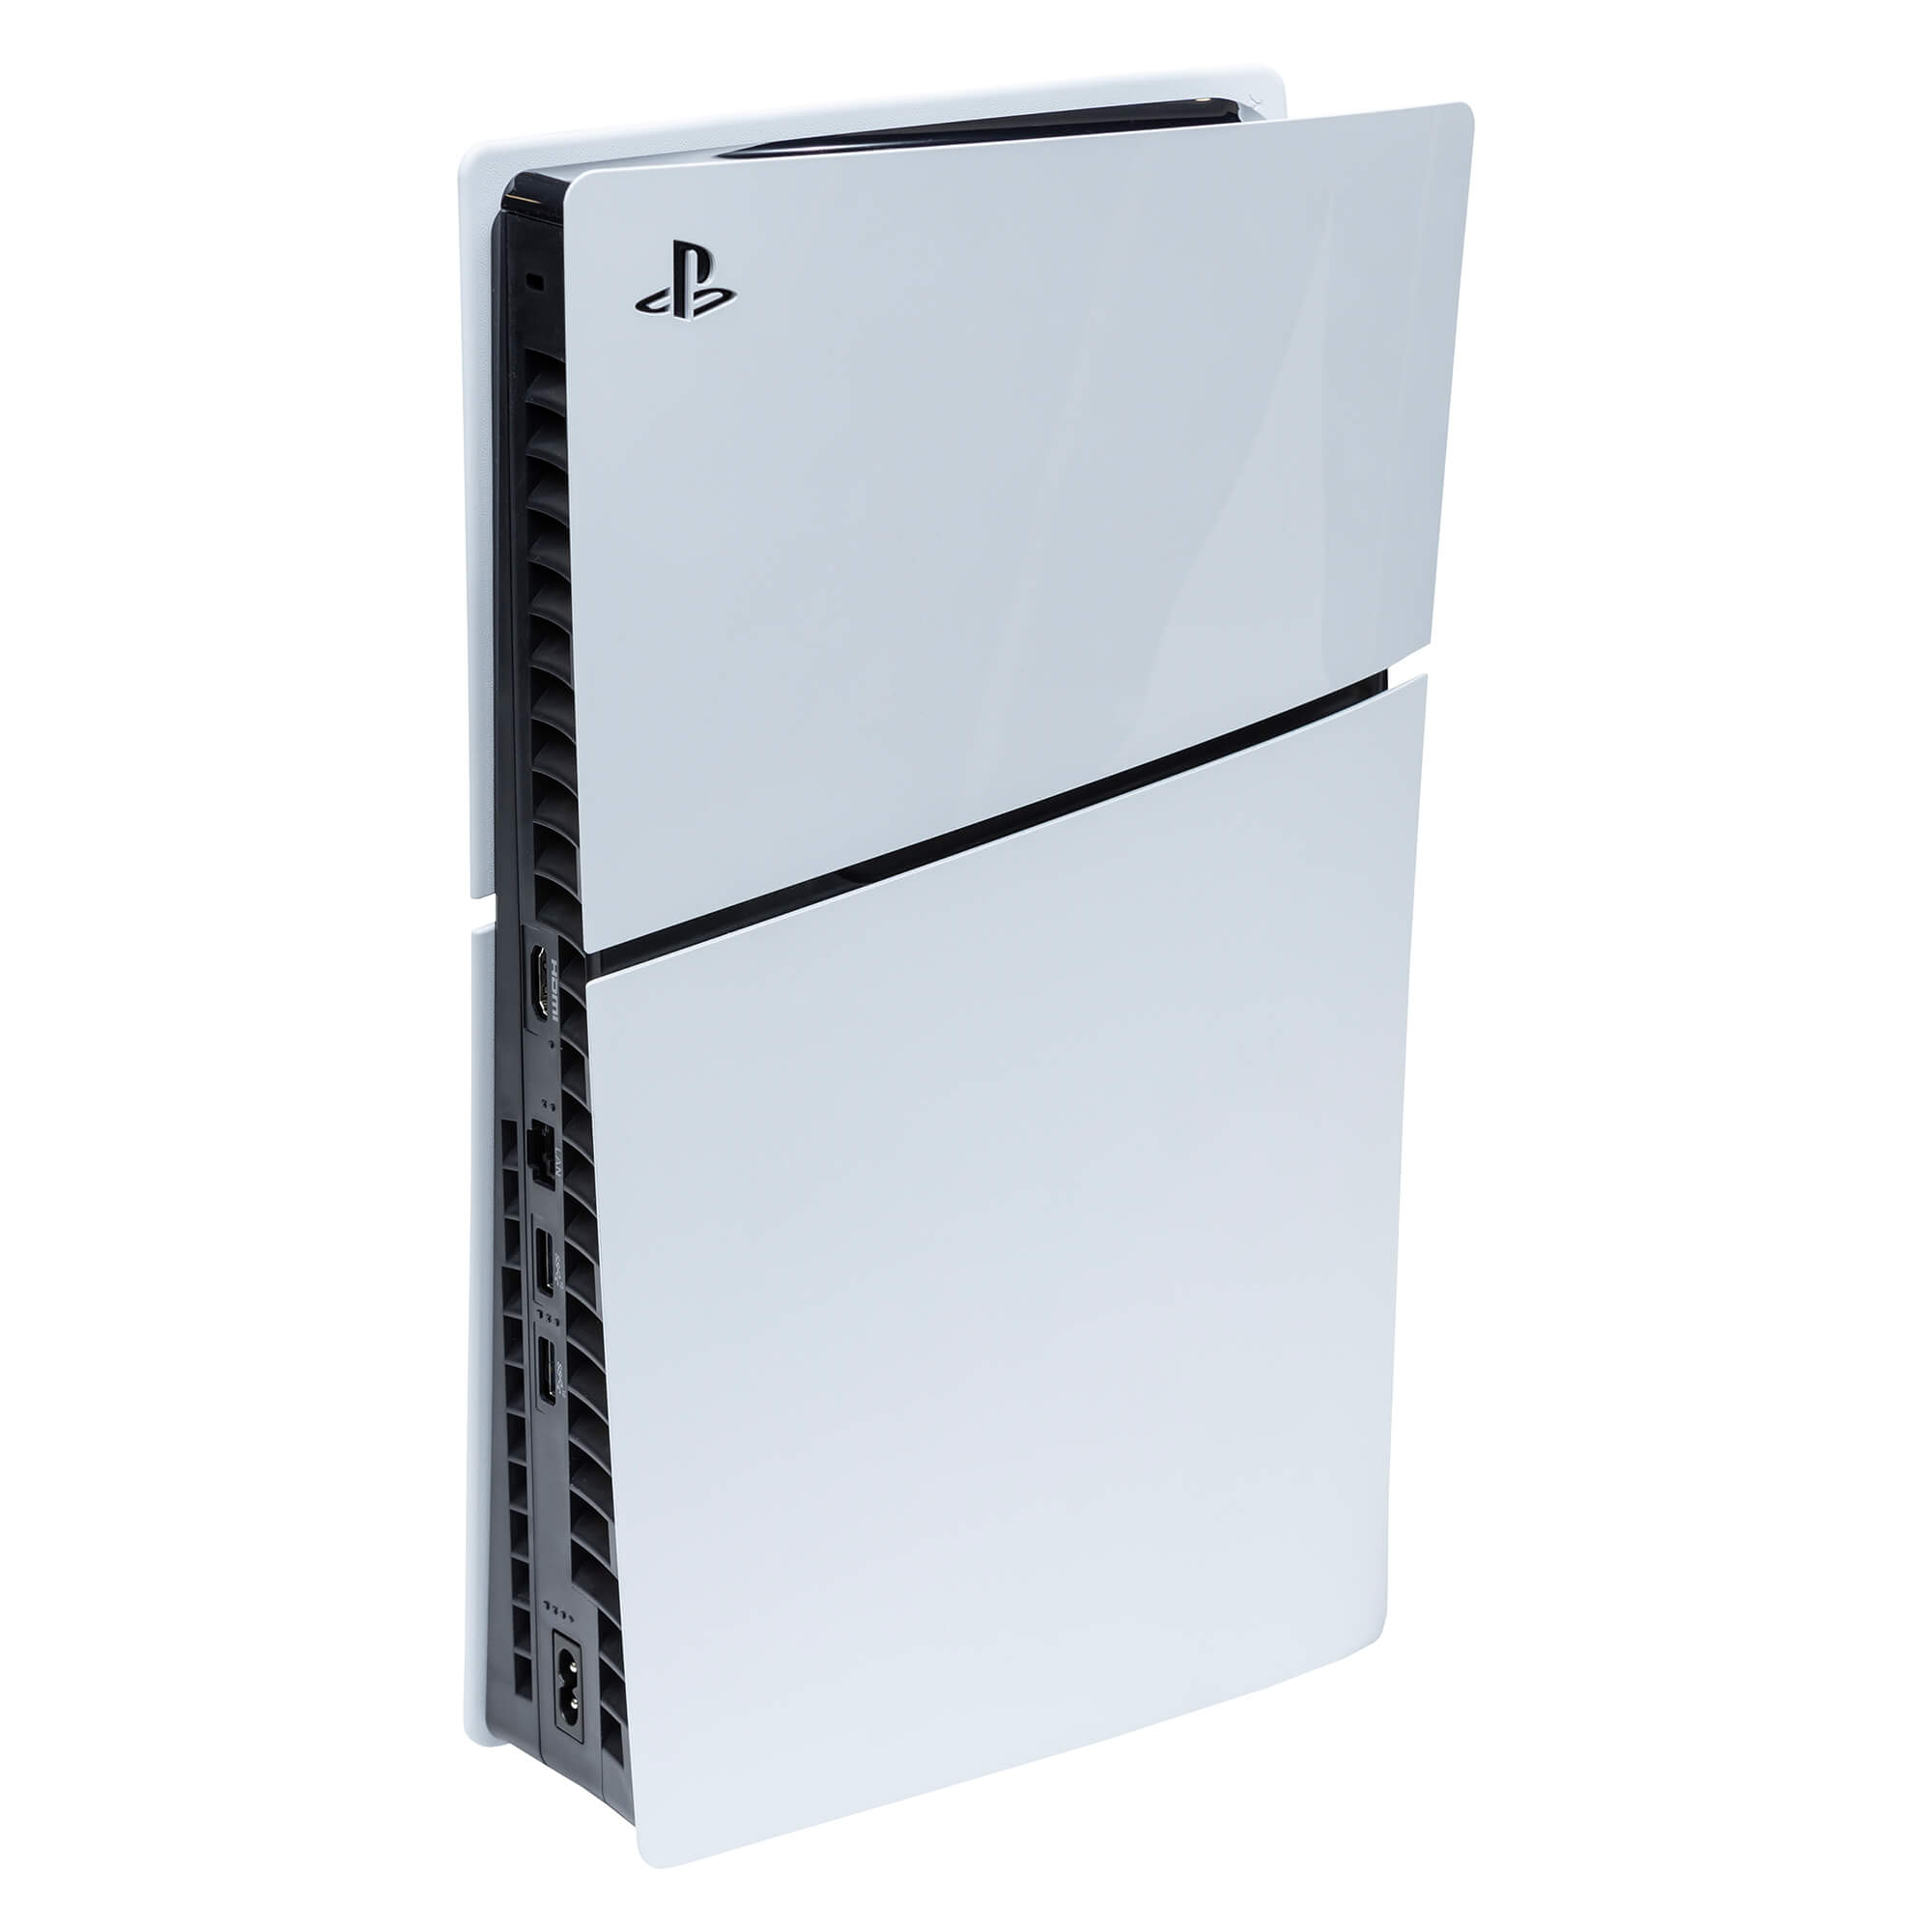 PlayStation 5 Slim console shown in a HIDEit Mount for PS5 Slim Wall Mount.